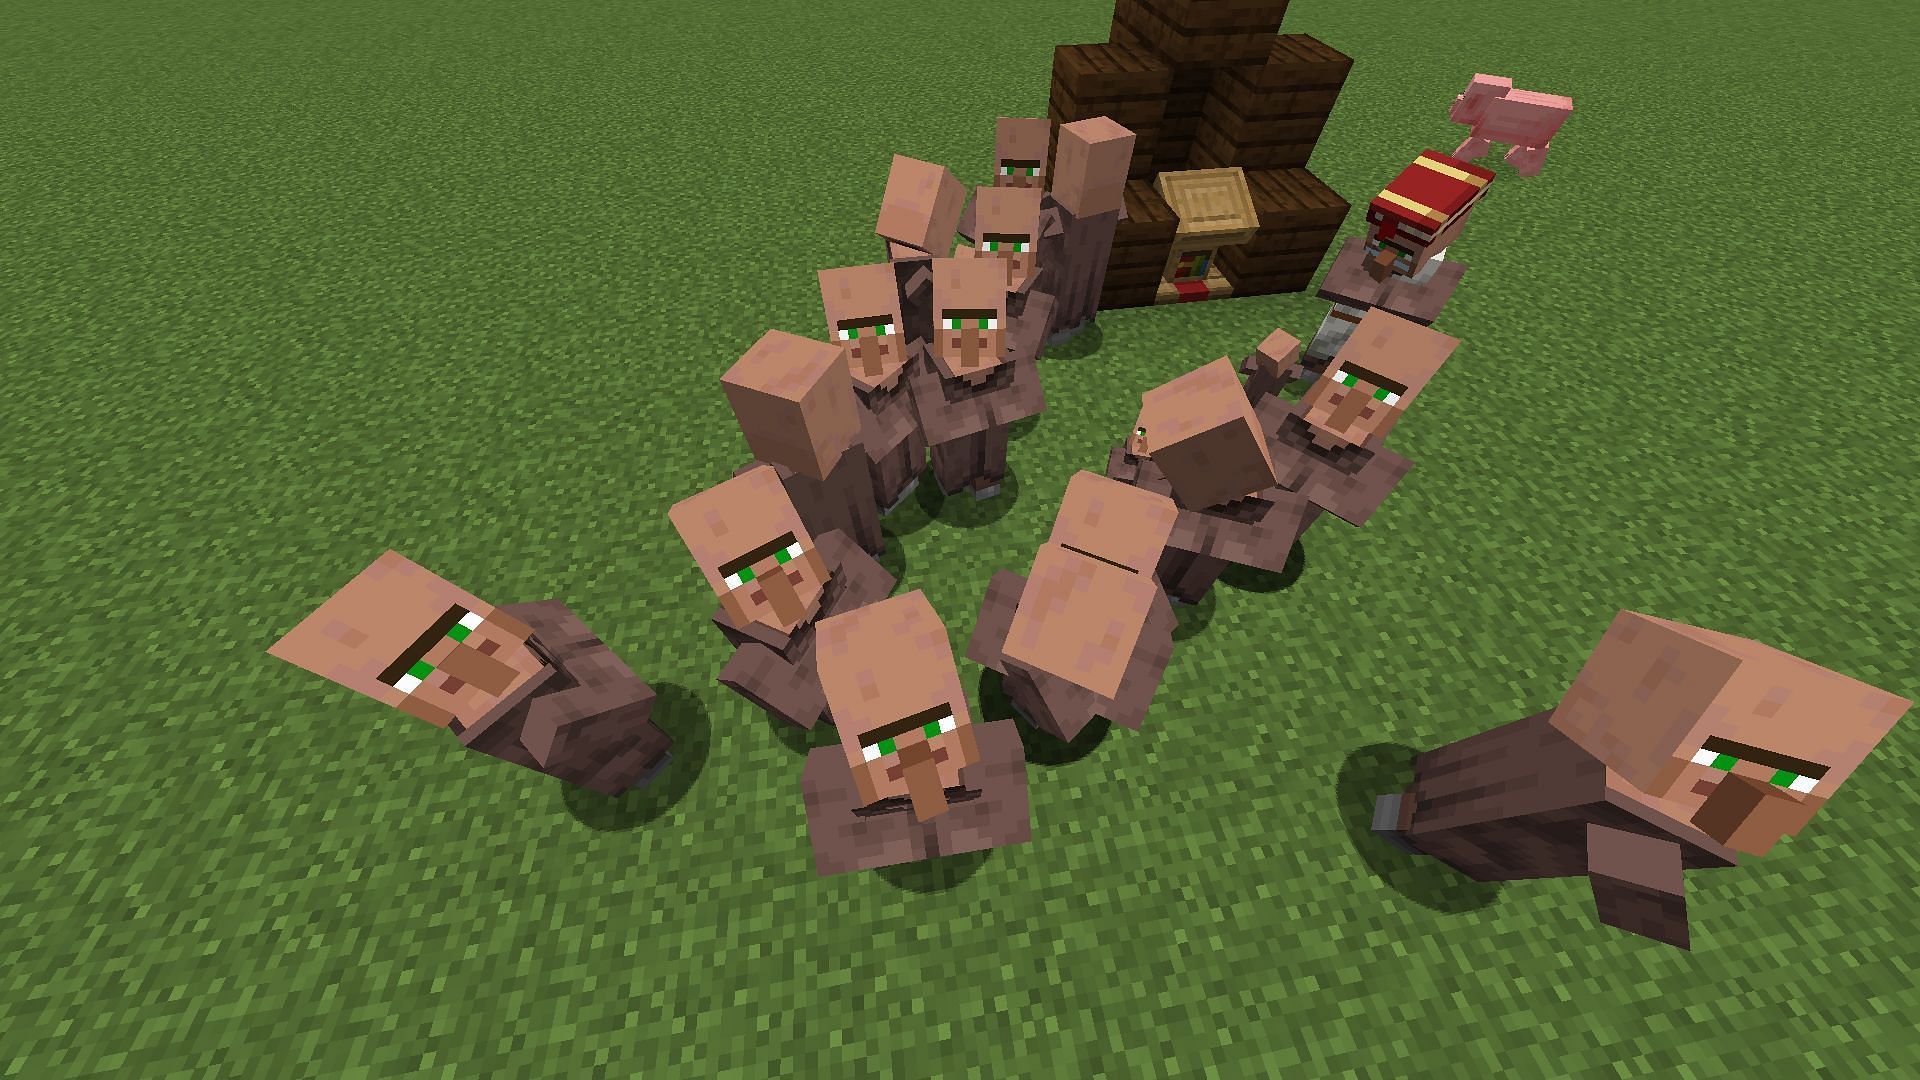 If there are too many employed villagers, new ones will stop taking up jobs in Minecraft (Image via Mojang)